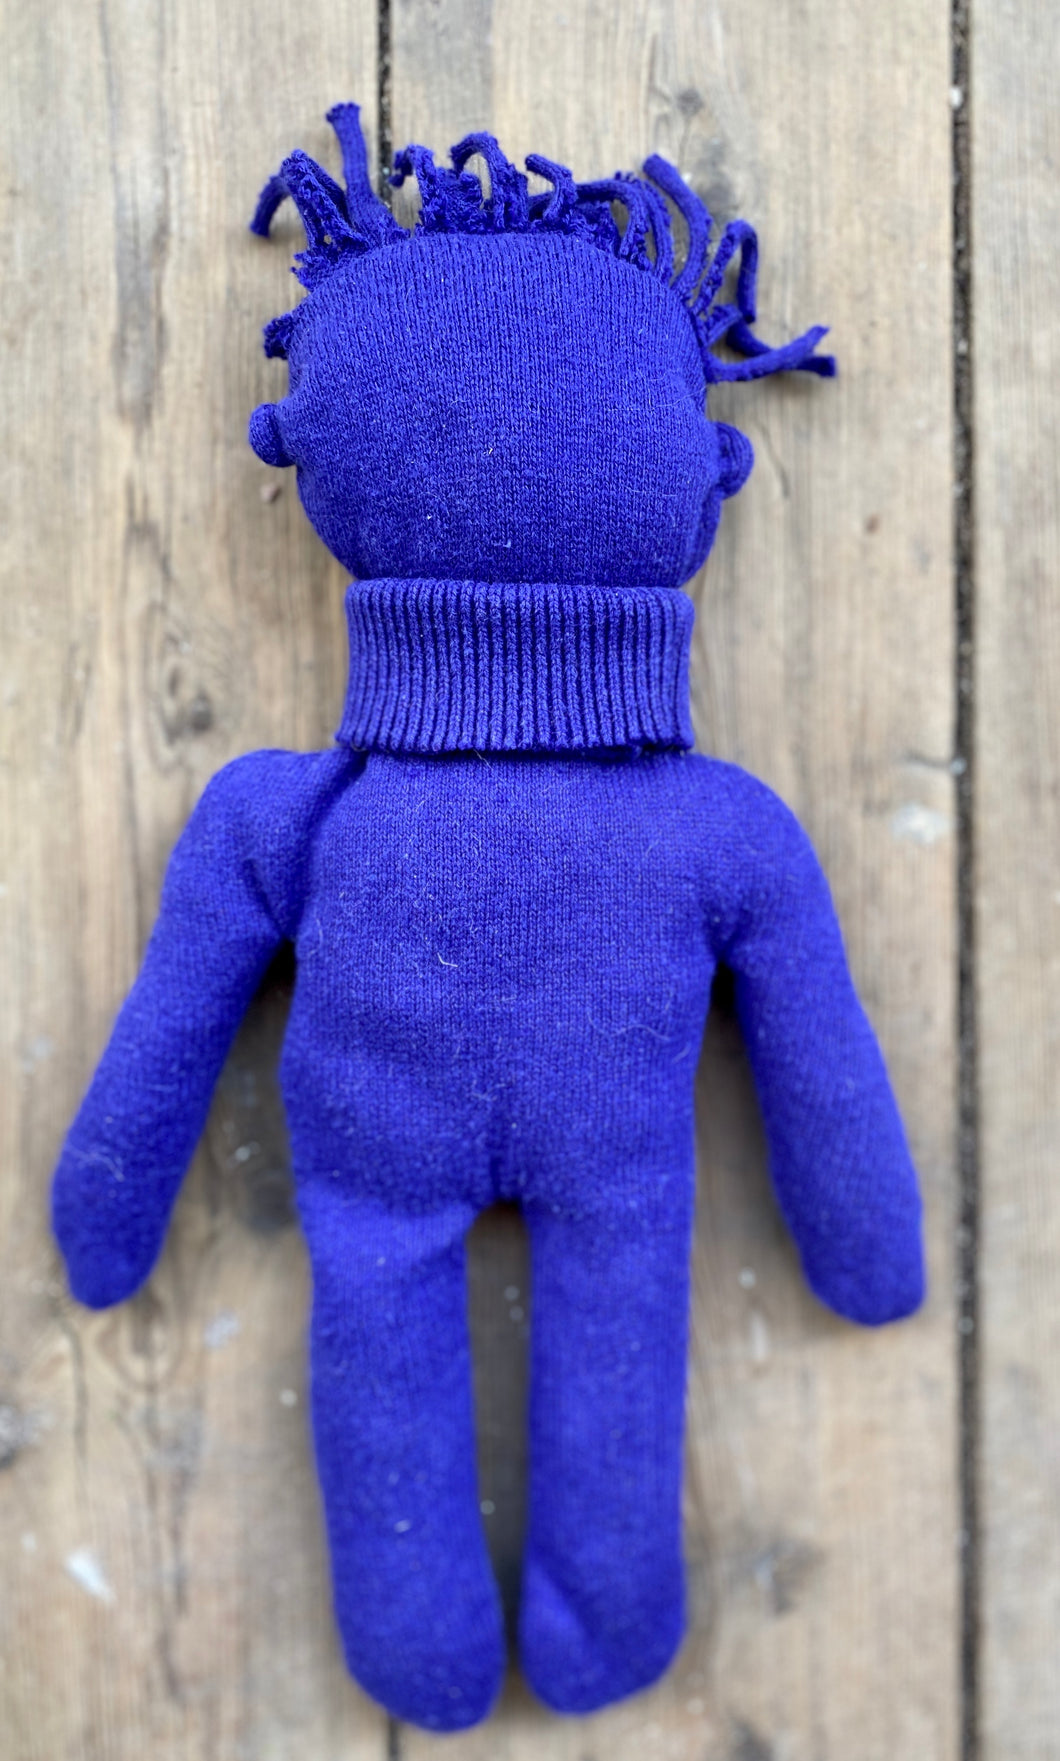 Yves Klein Blue Circulair doll made from a recycled pullover 100% cotton